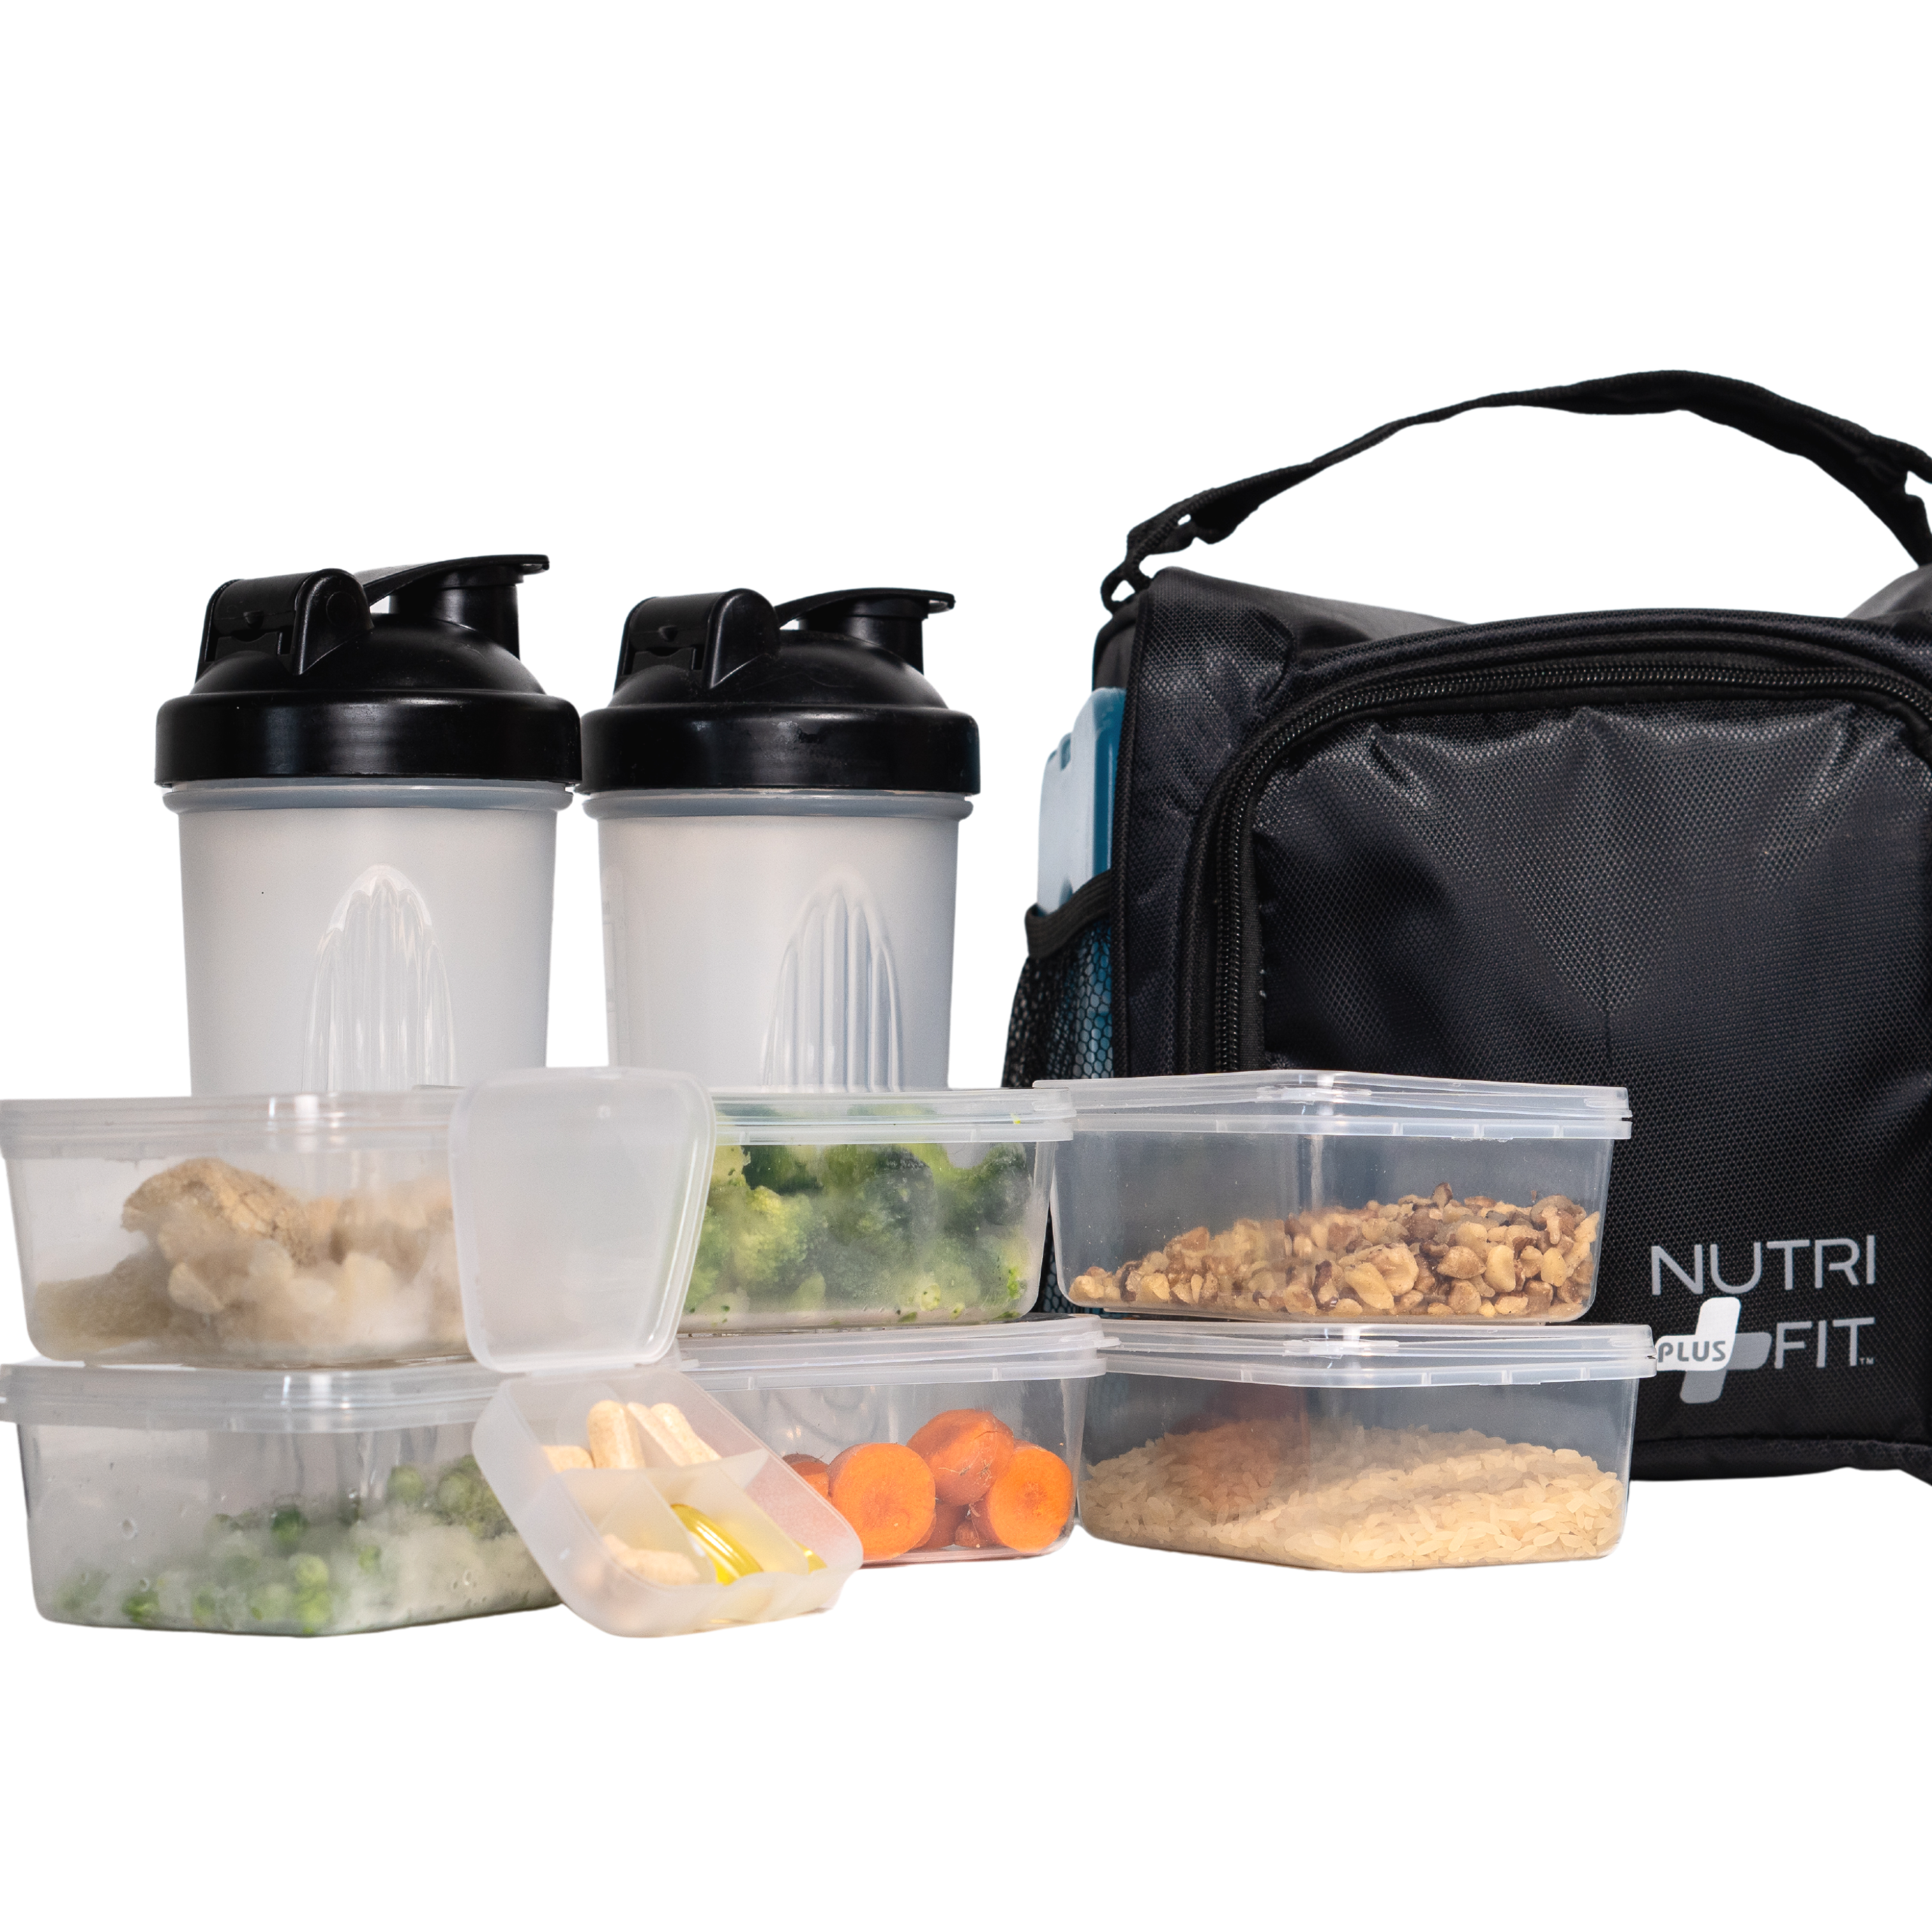 NUTRIFIT Meal Prep Bag for the Active Live Style with 6 food Containers, Shakers, and Vitamin Carrier